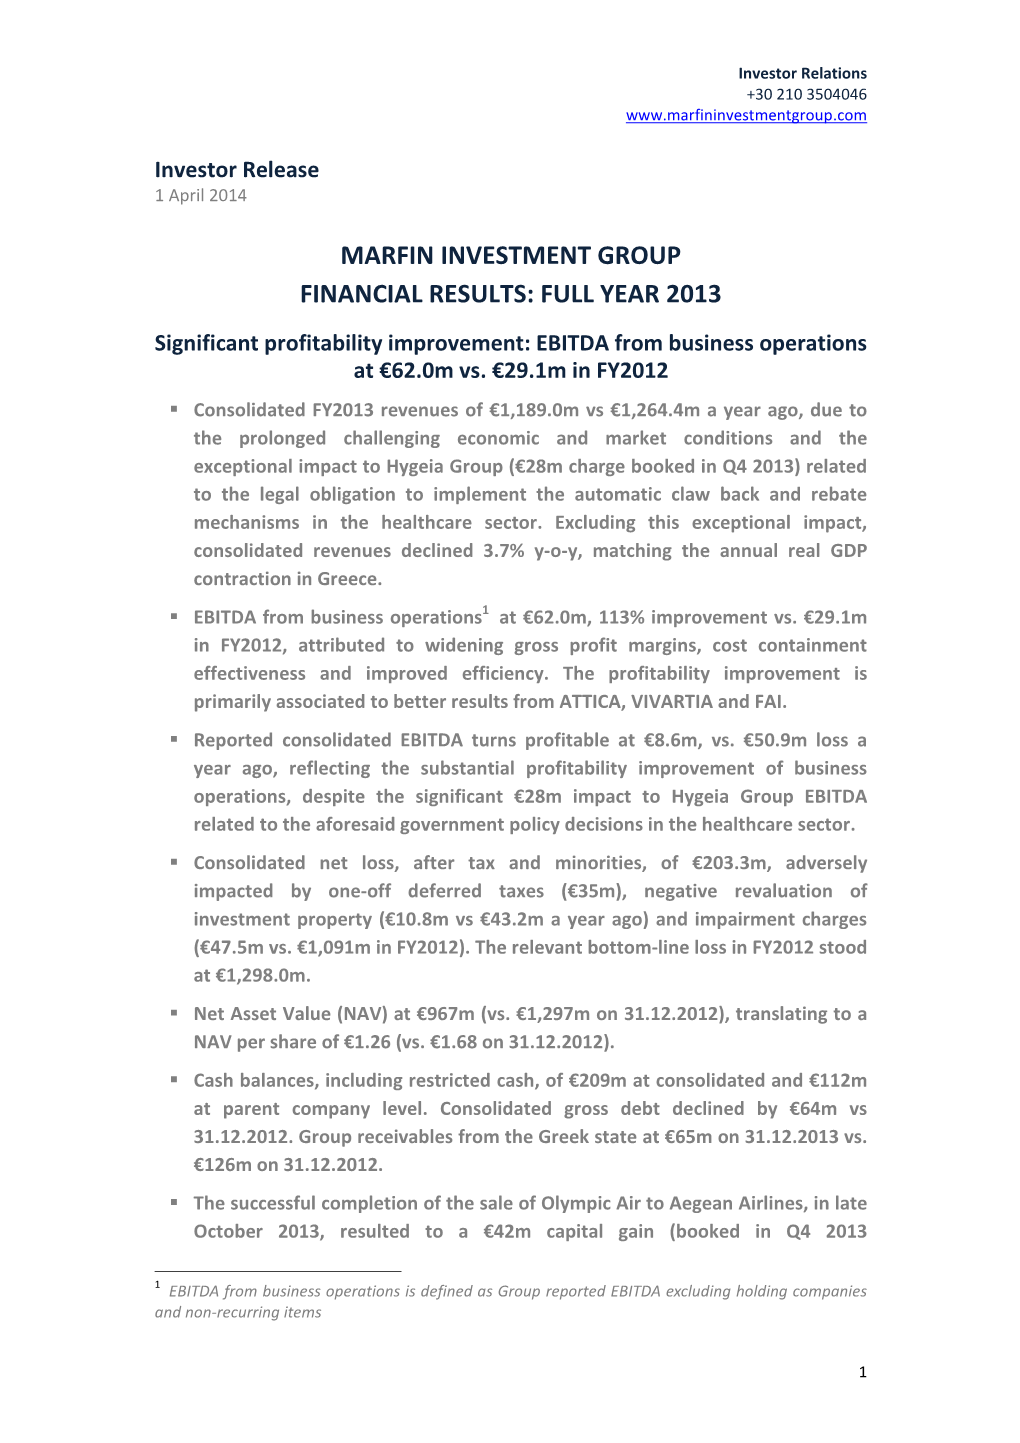 MARFIN INVESTMENT GROUP FINANCIAL RESULTS: FULL YEAR 2013 Significant Profitability Improvement: EBITDA from Business Operations at €62.0M Vs